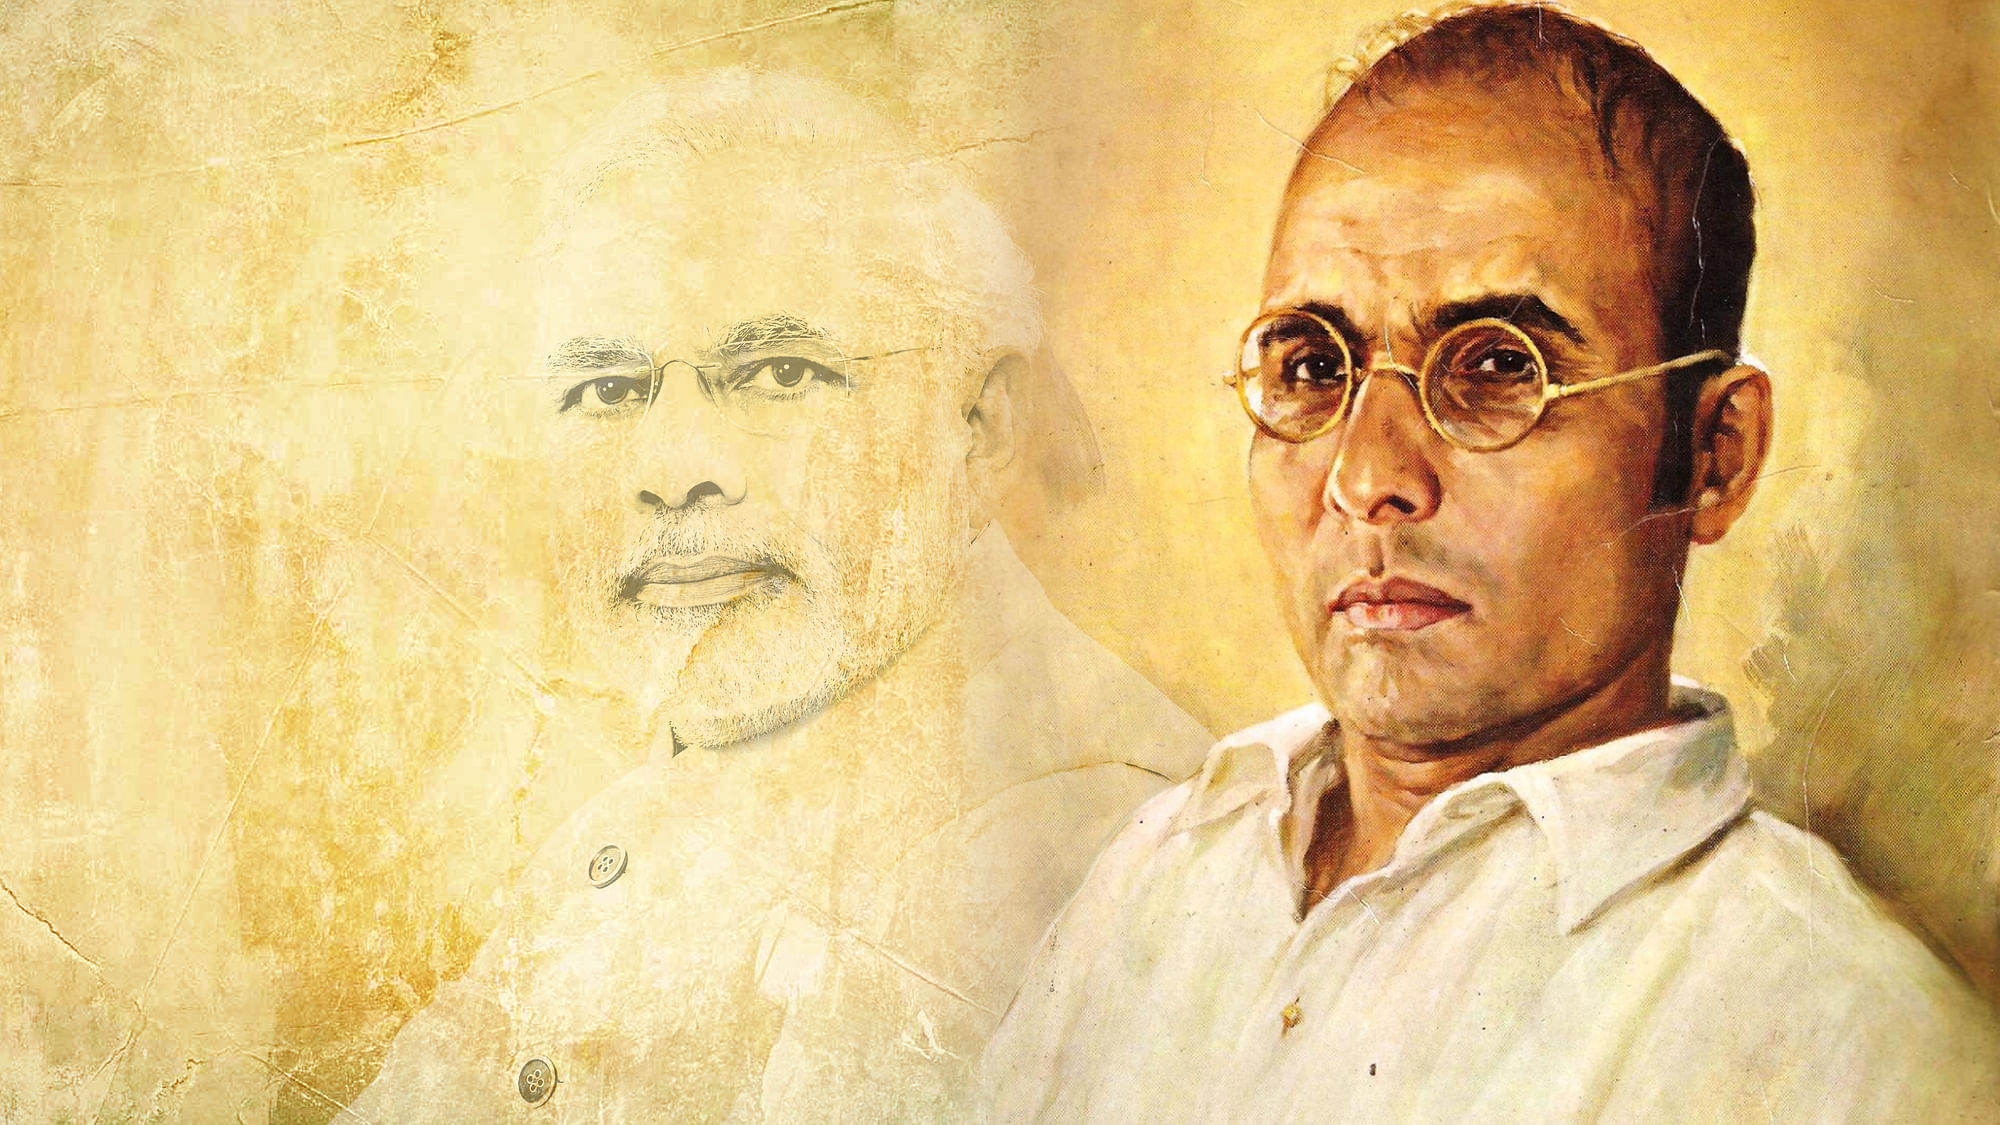 VD Savarkar was an early proponent of militant Hindutva in India’s fight against the British. 